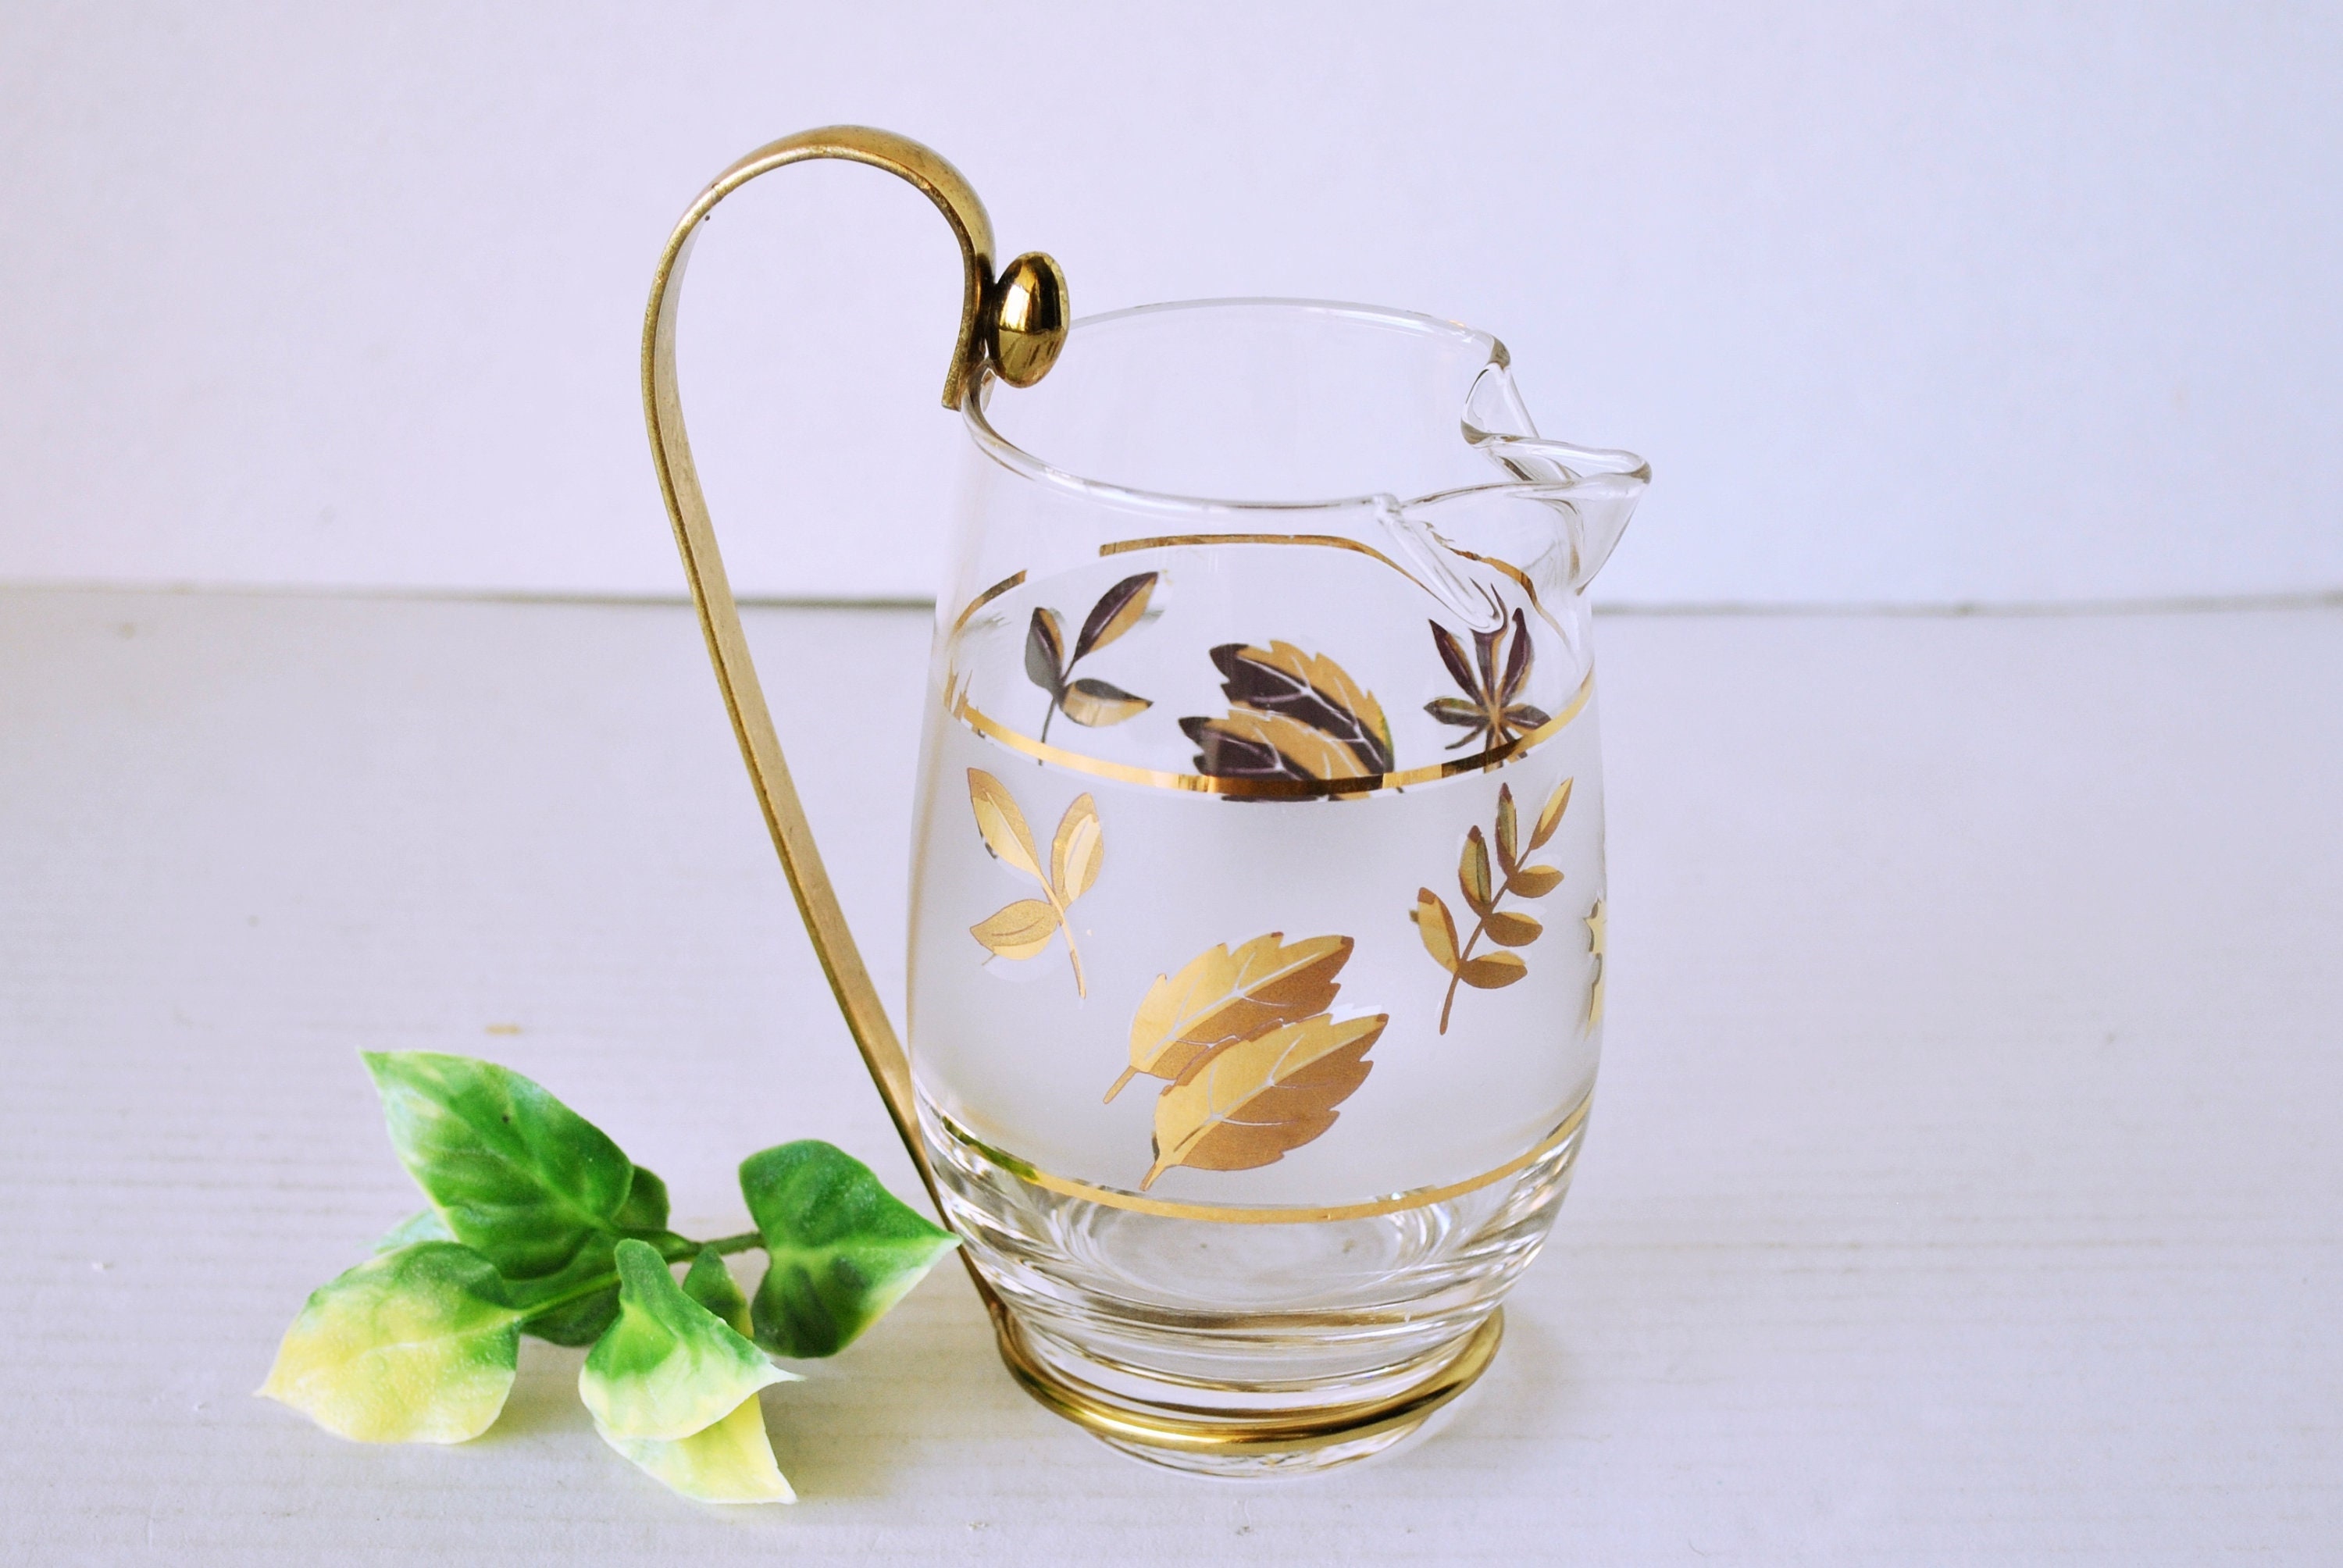 1970s Libbey stained glass tea cups gold tone metal handles set of